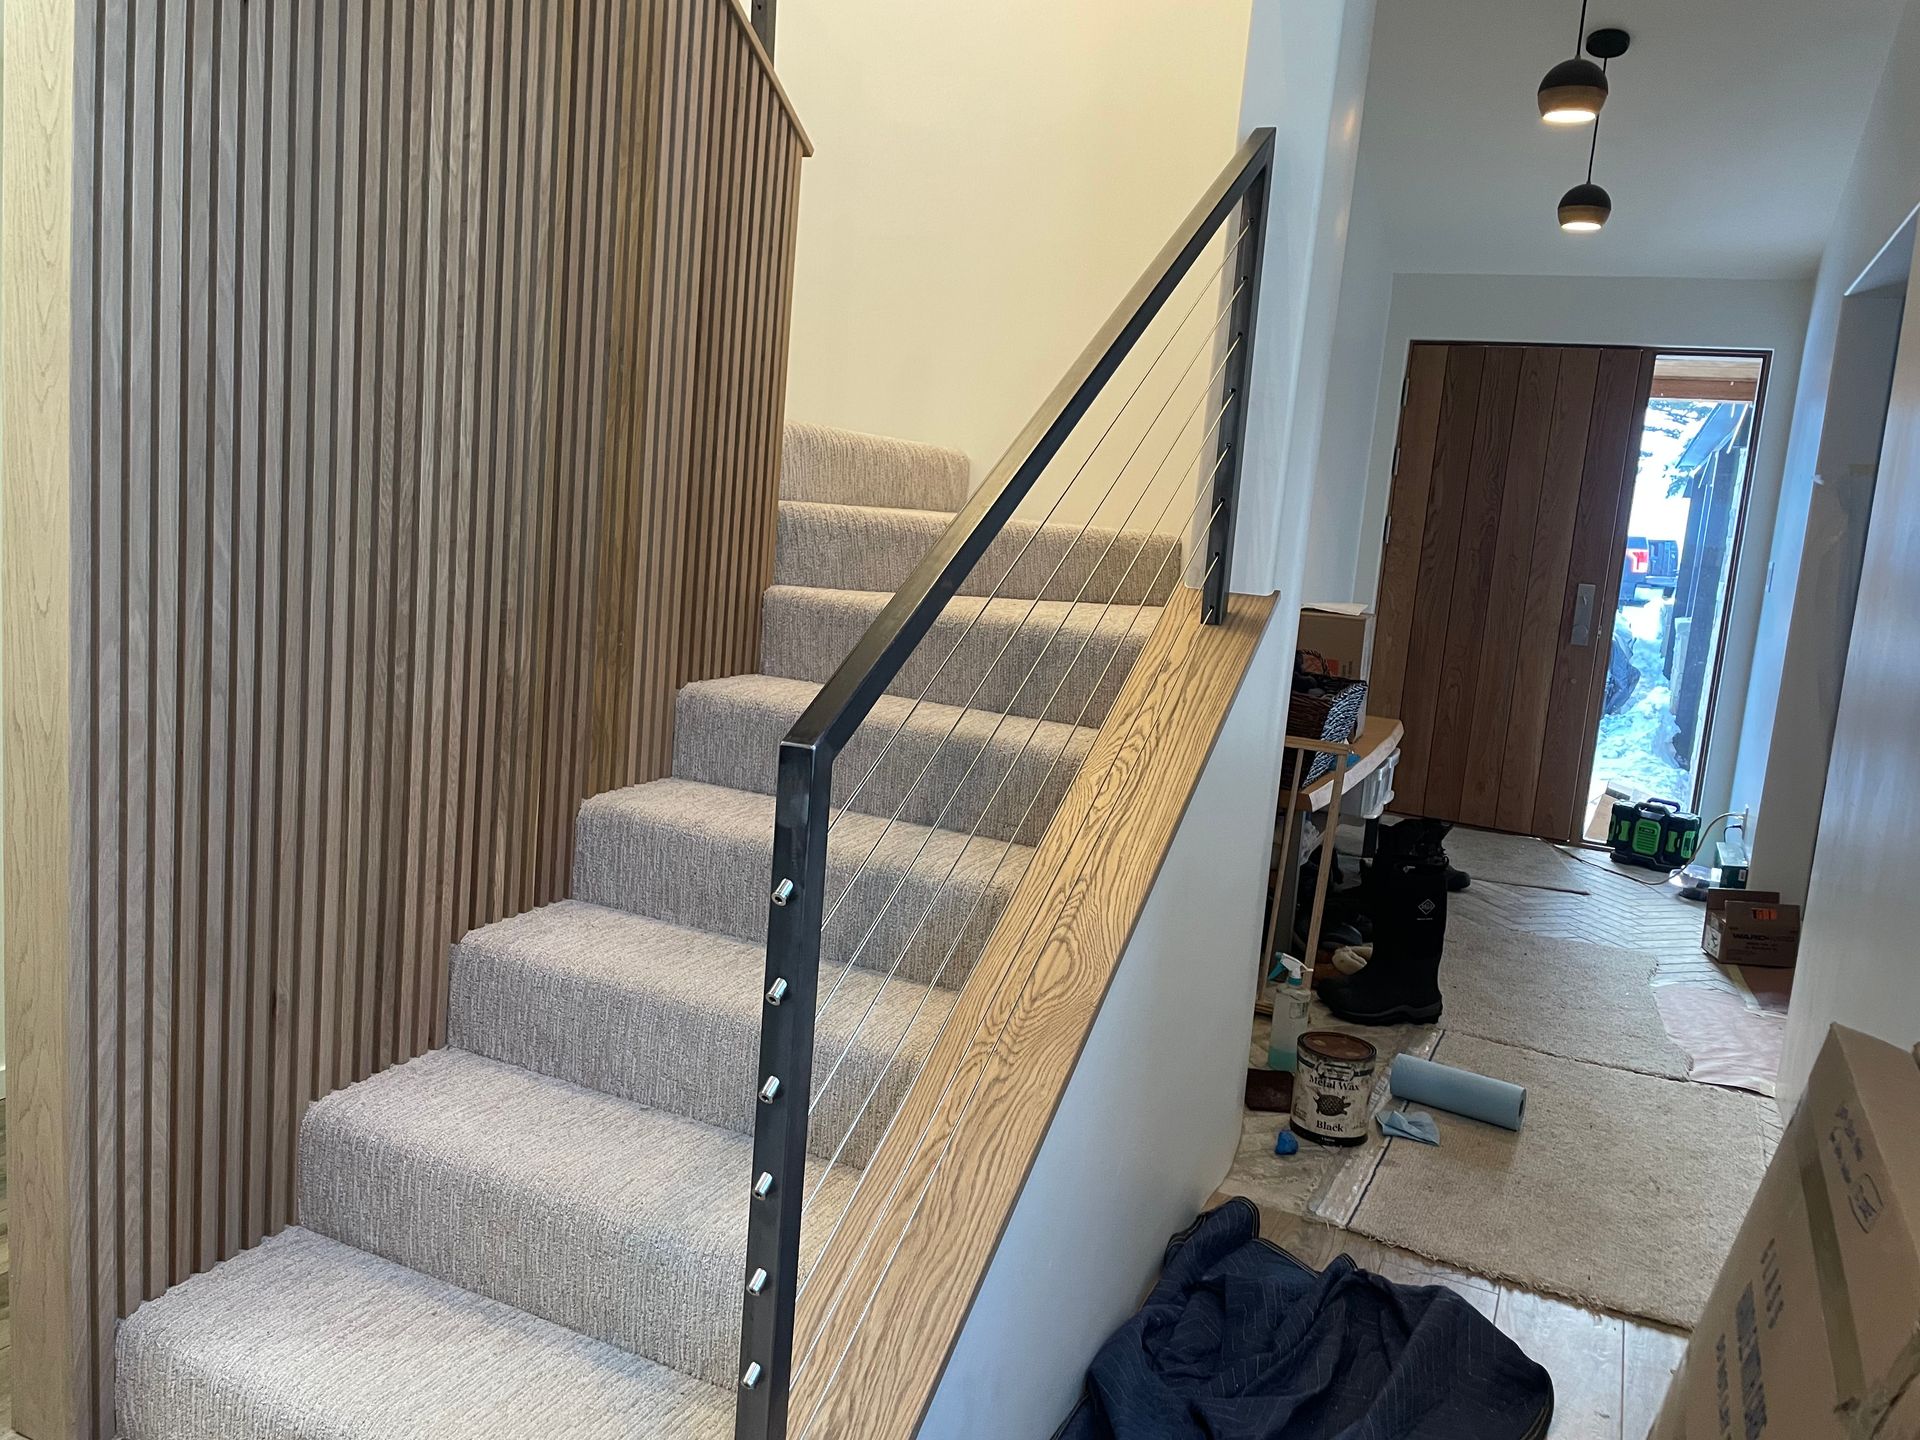 A staircase with carpeted steps and a metal railing in a house.